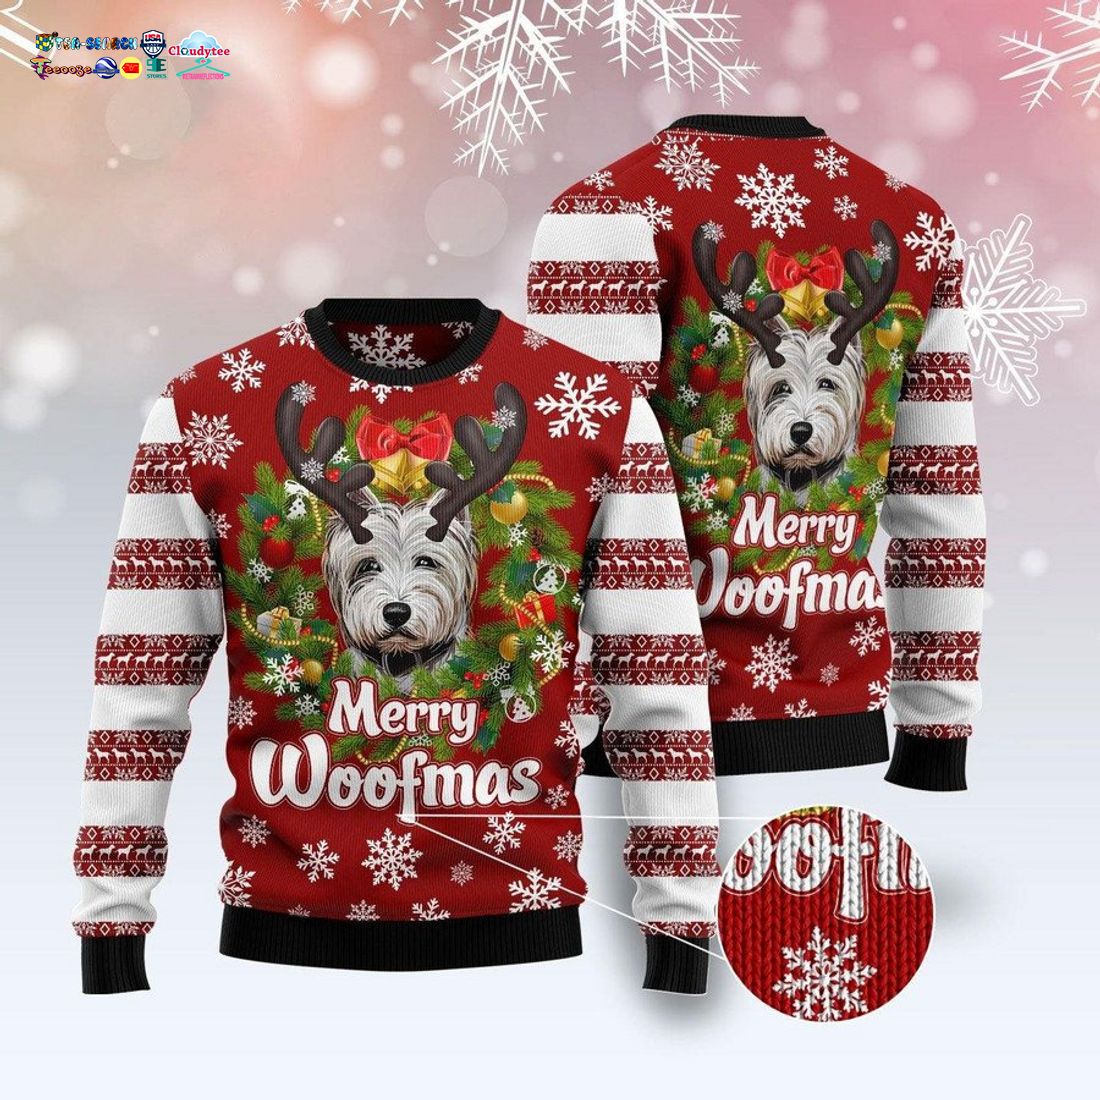 West Highland White Terrier Merry Woofmas Ugly Christmas Sweater